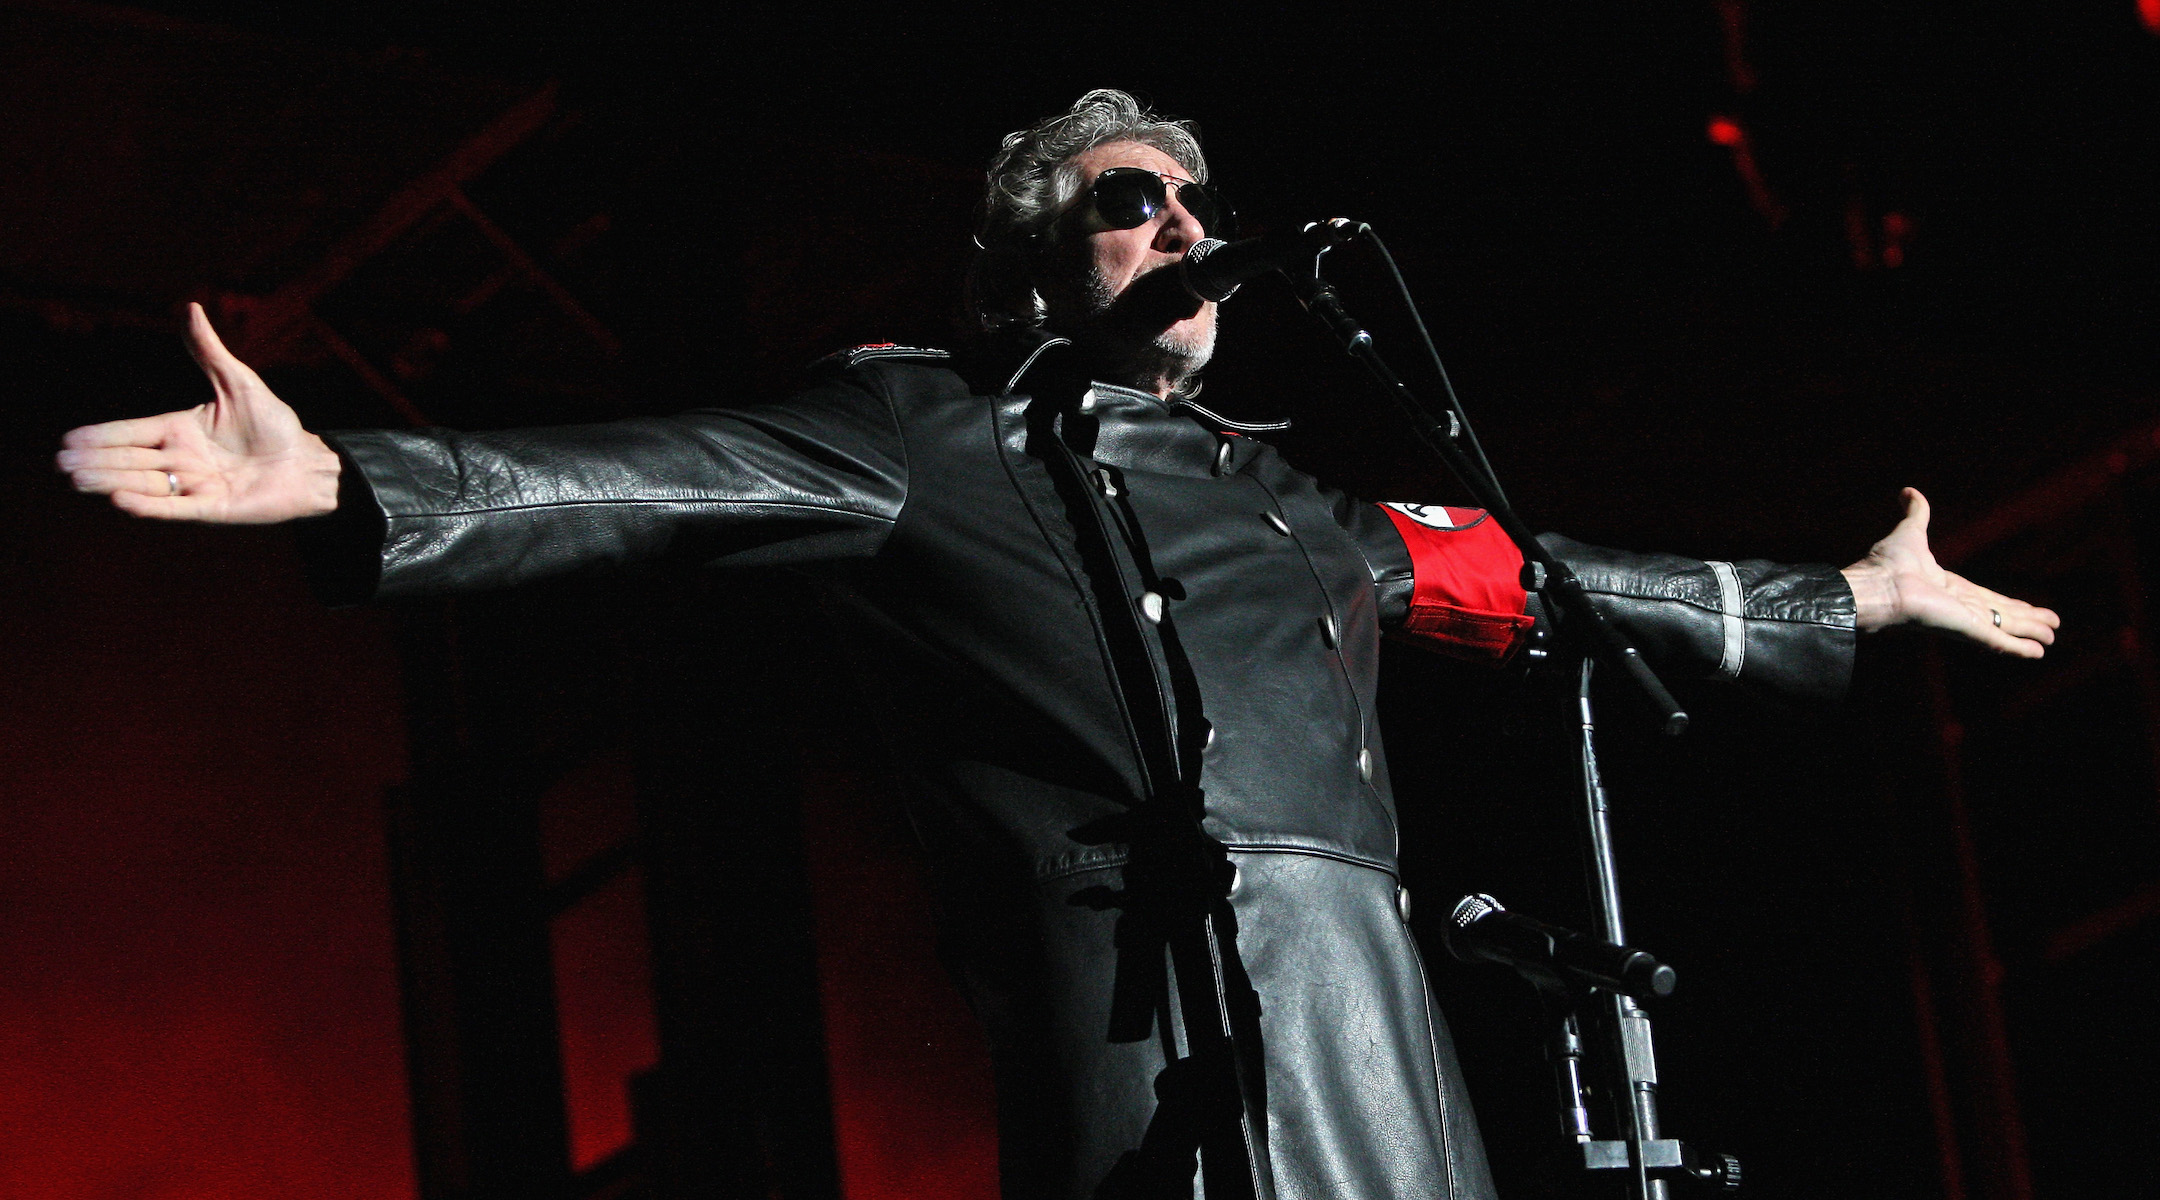 Roger Waters seen performing in Berlin in 2013. His onstage costume resembling a Nazi officer has come under scrutiny. (Adam Berry/Getty Images)